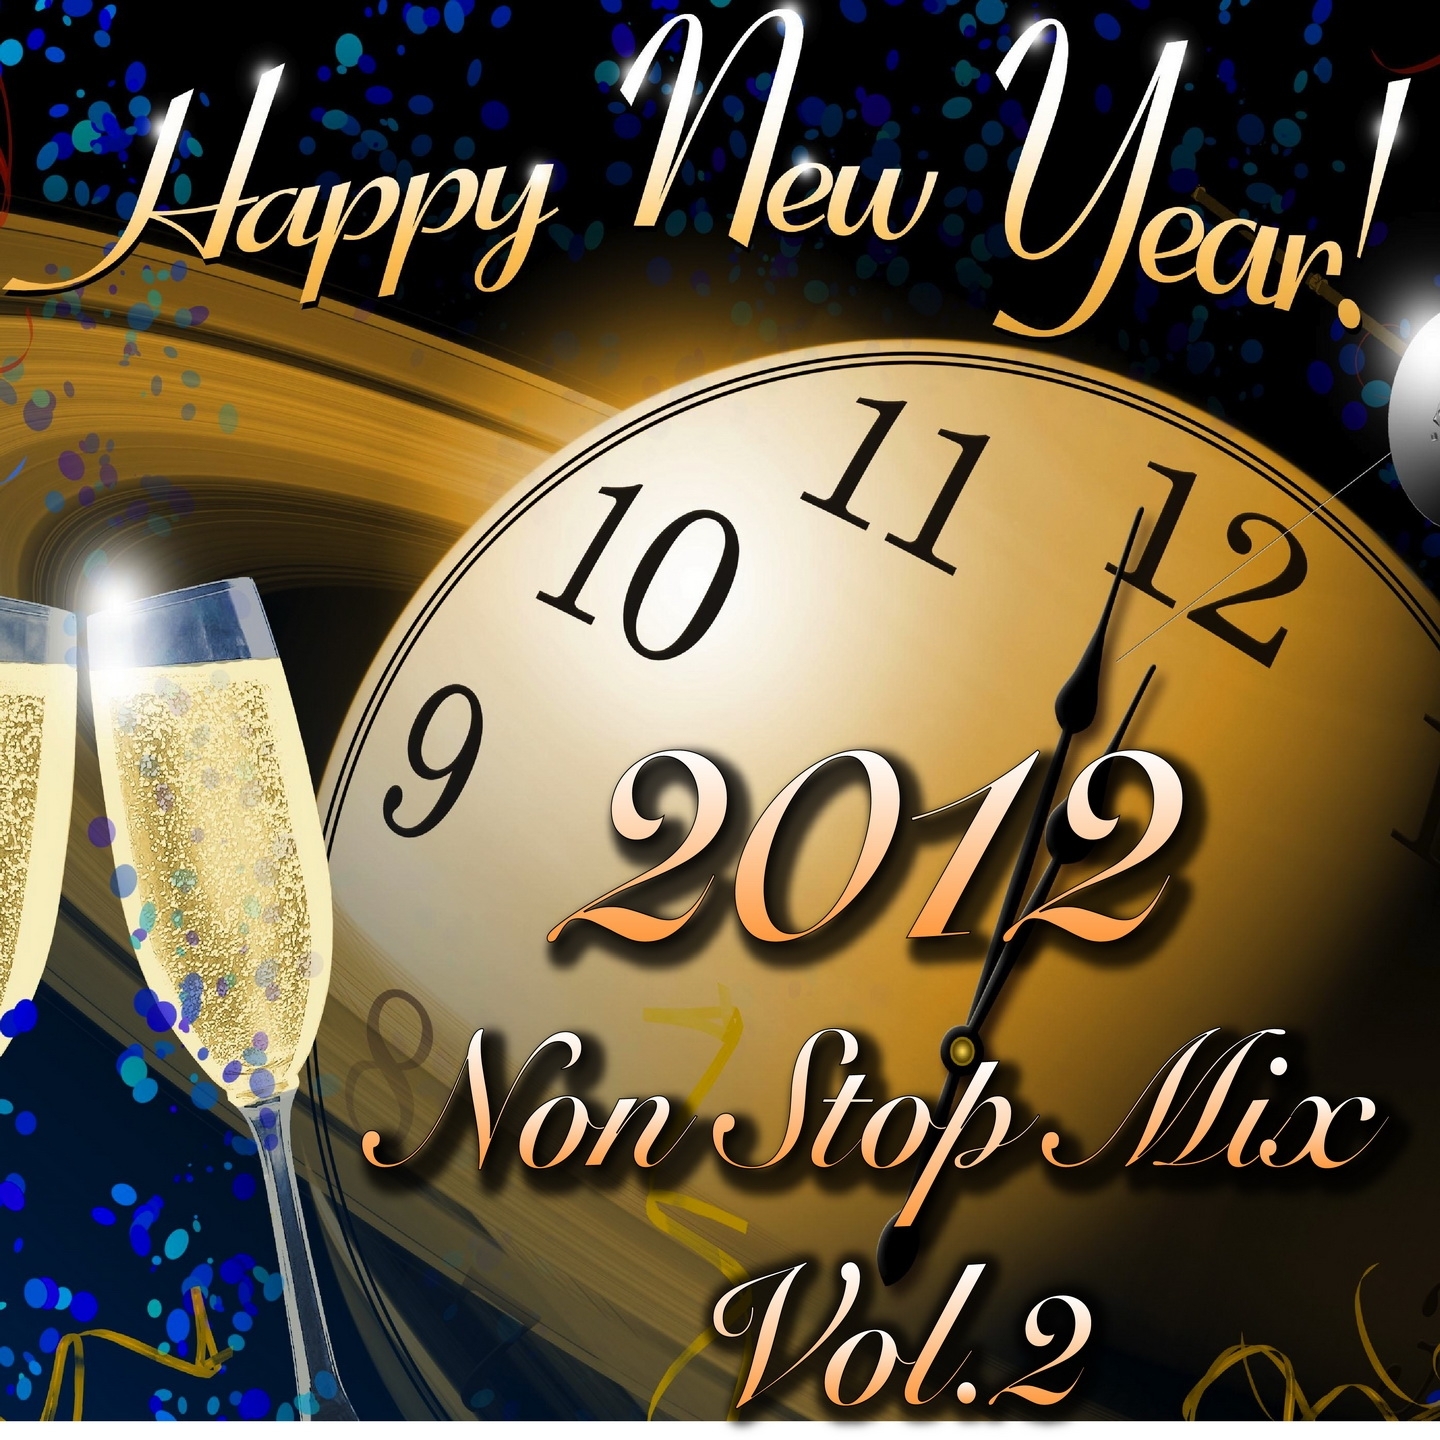 Happy New Year 2012 Non Stop Mix, Vol. 2